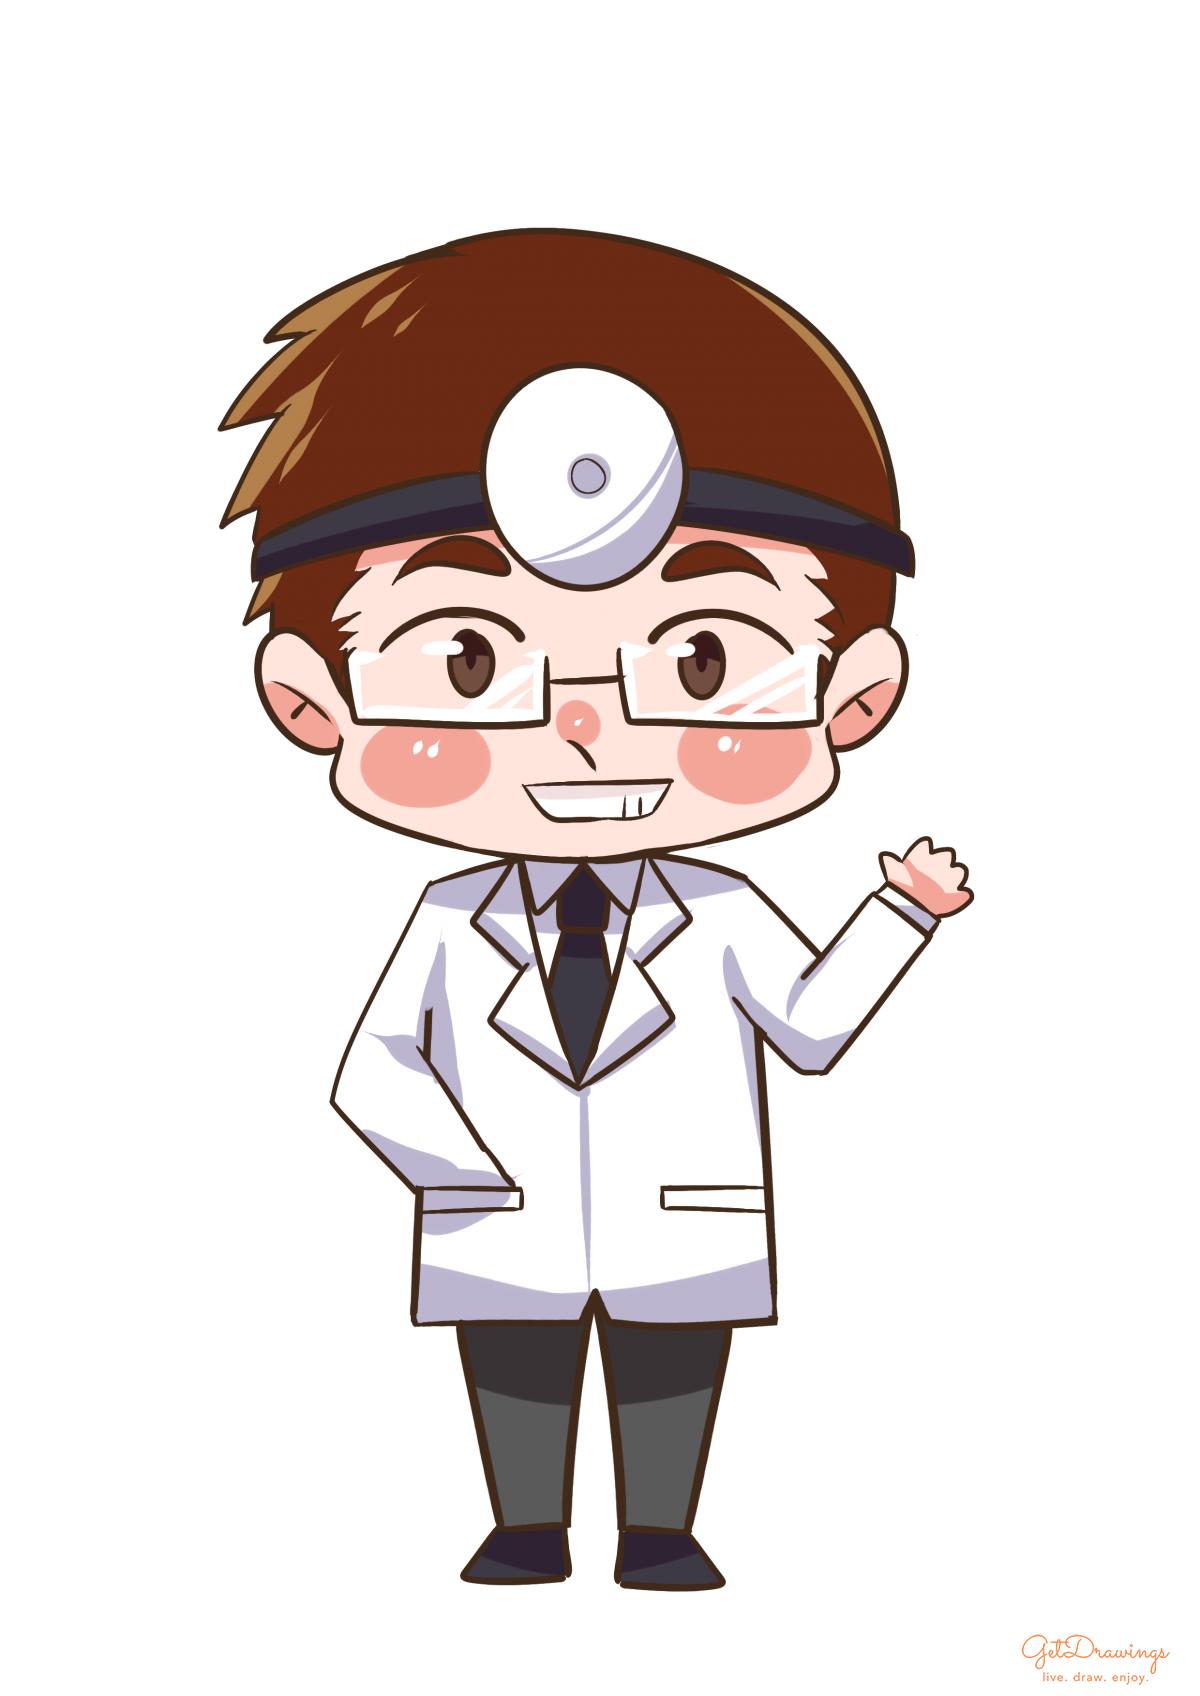 How to draw a Doctor? | GetDrawings.com